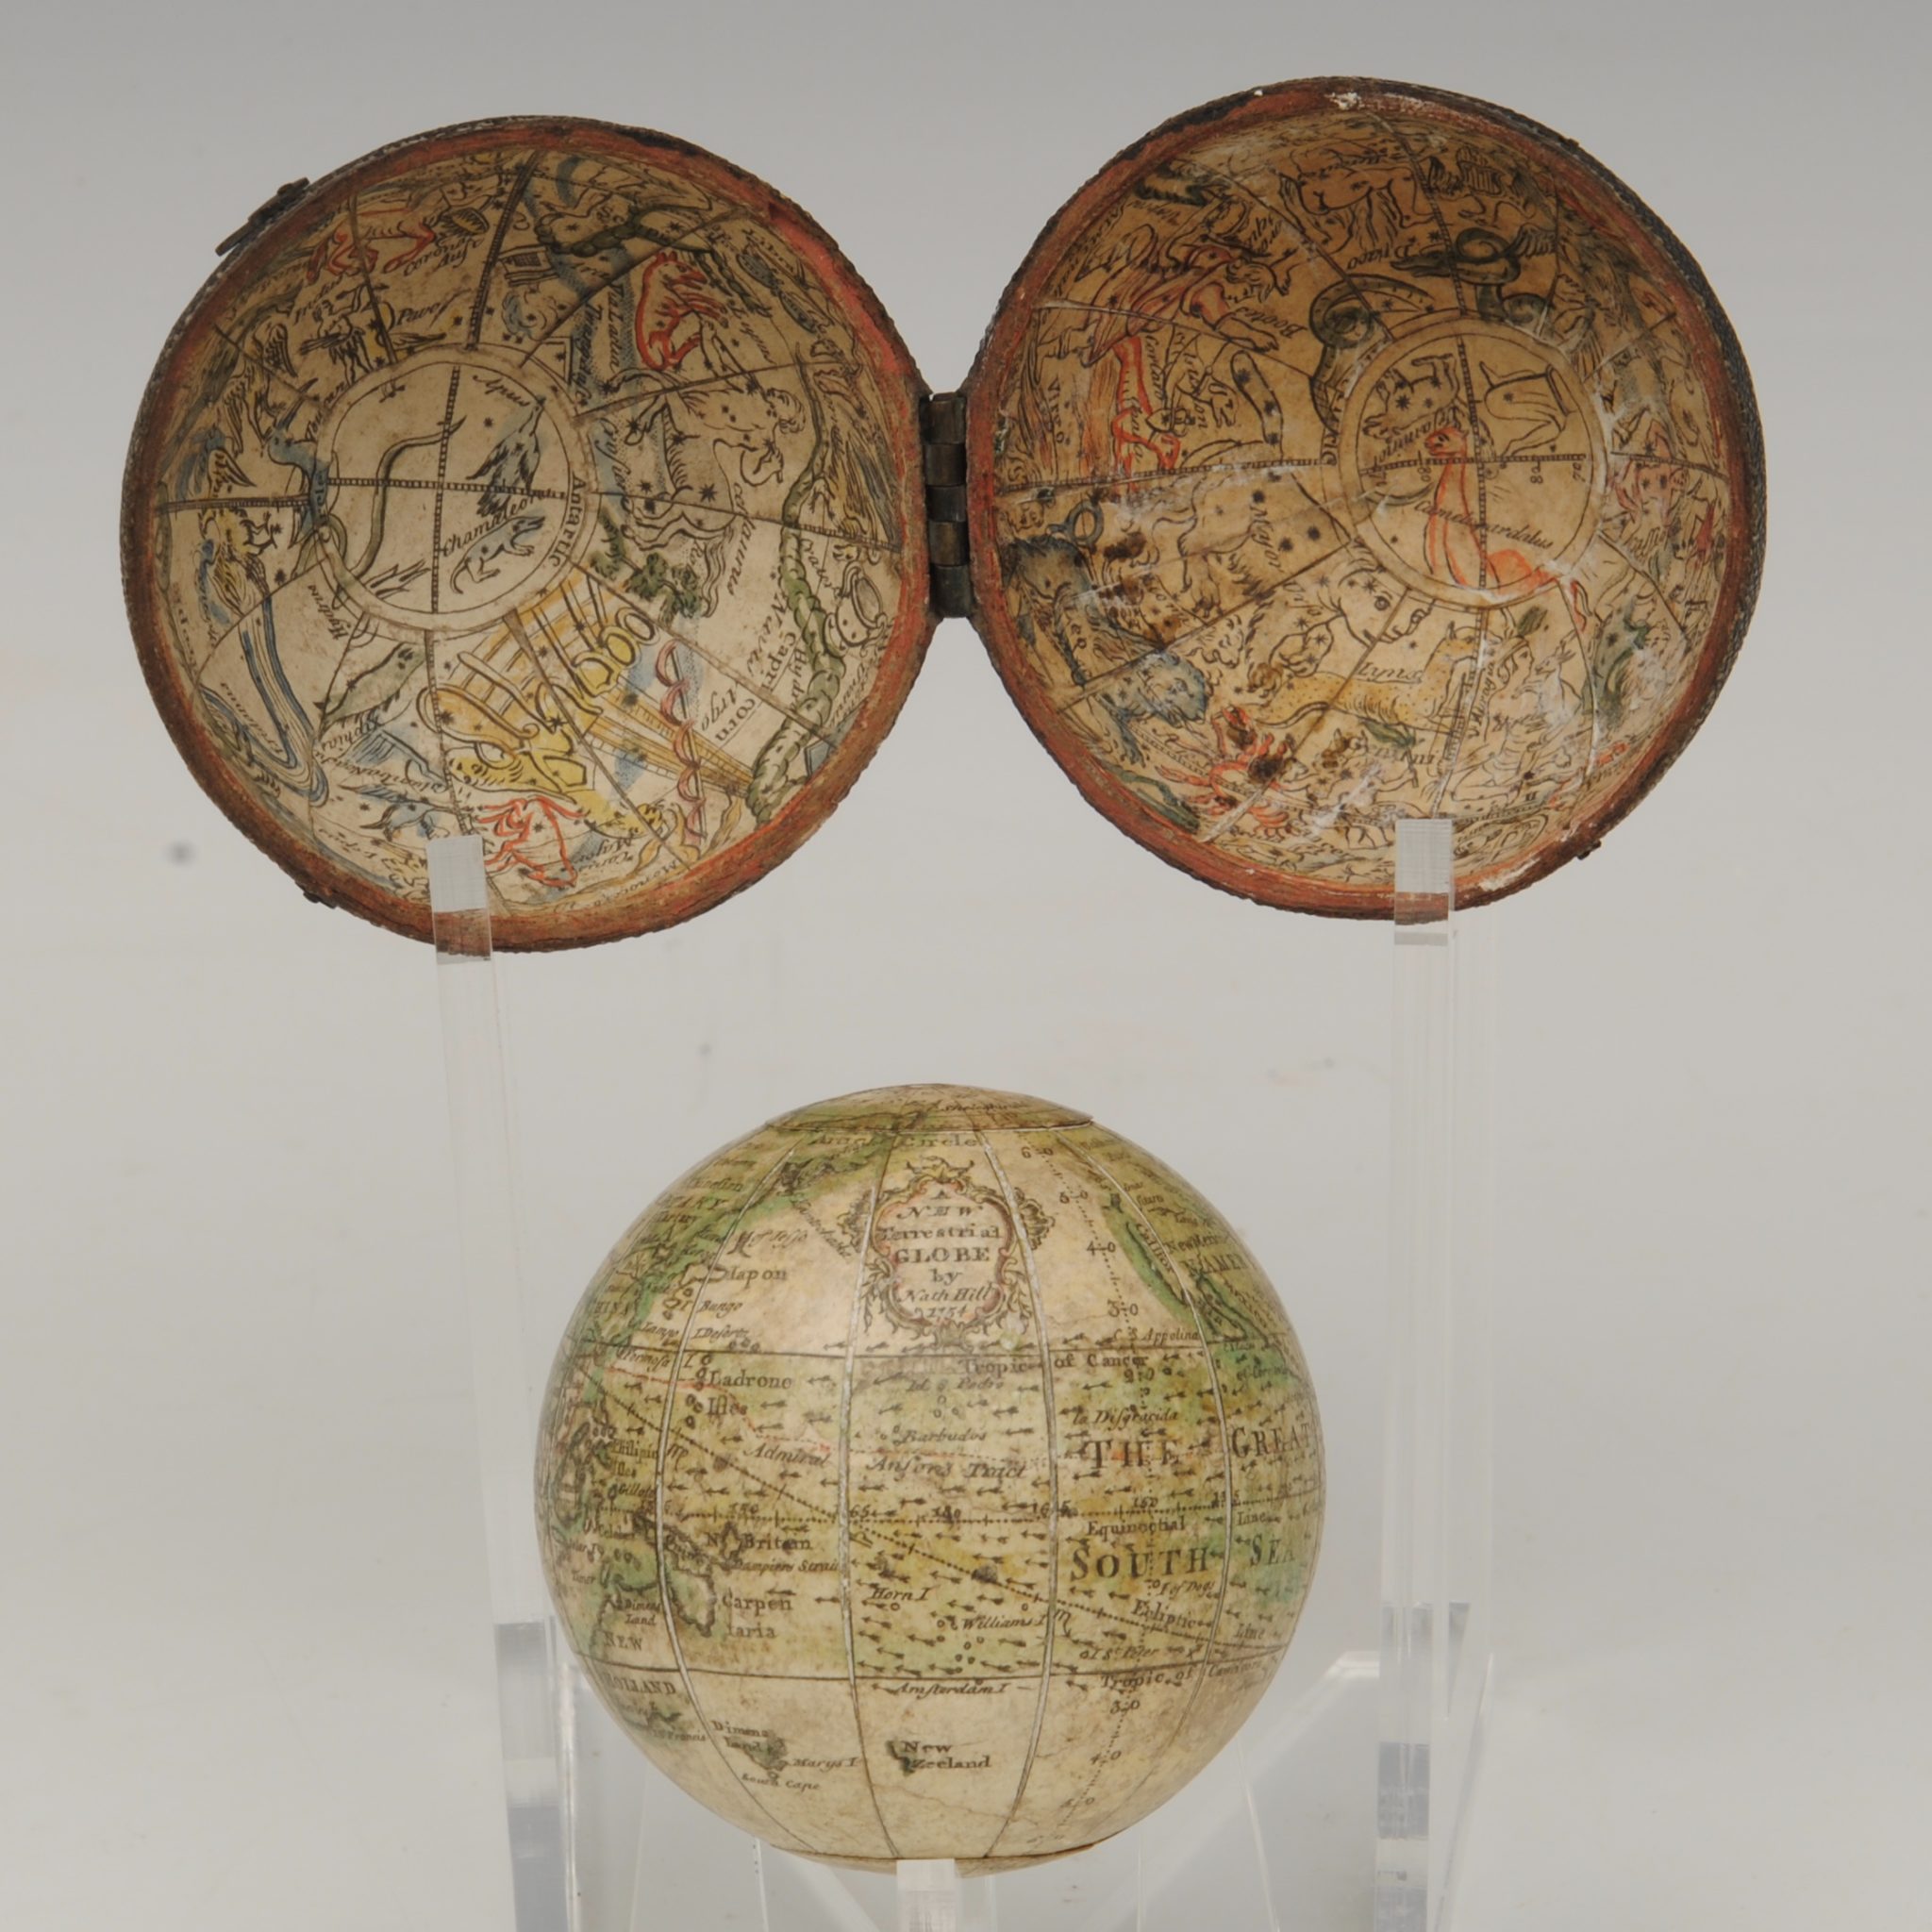 A FINE EXAMPLE OF A 1754 NATHANIEL HILL POCKET GLOBE DATED 1754